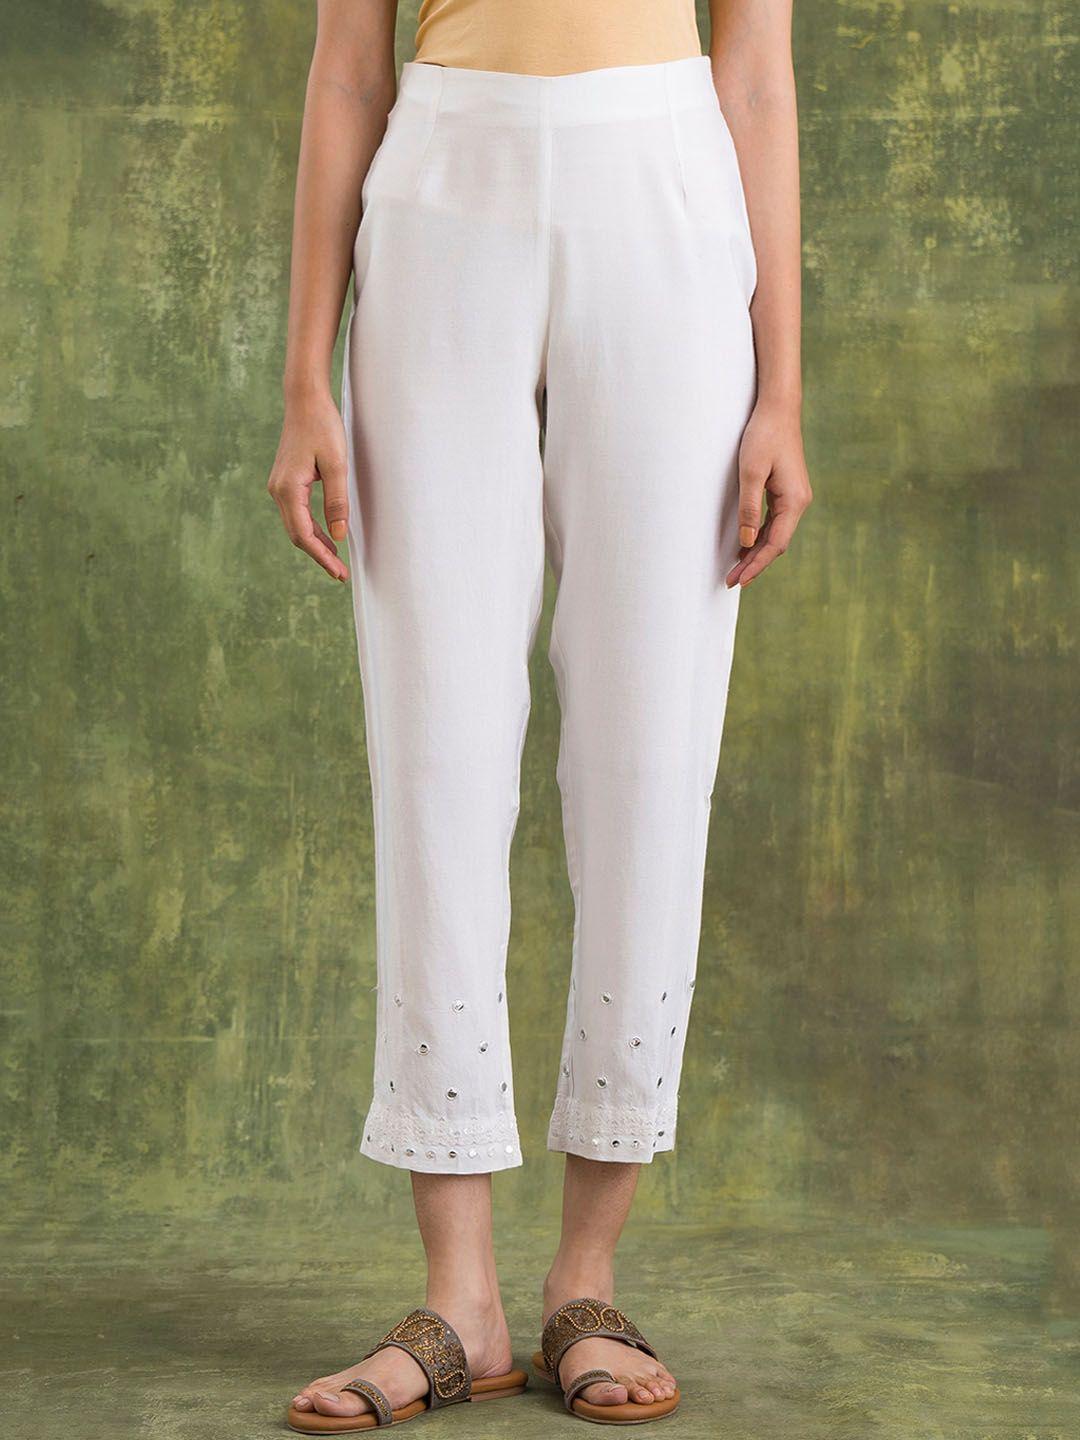 w the folksong collection women embellished trousers